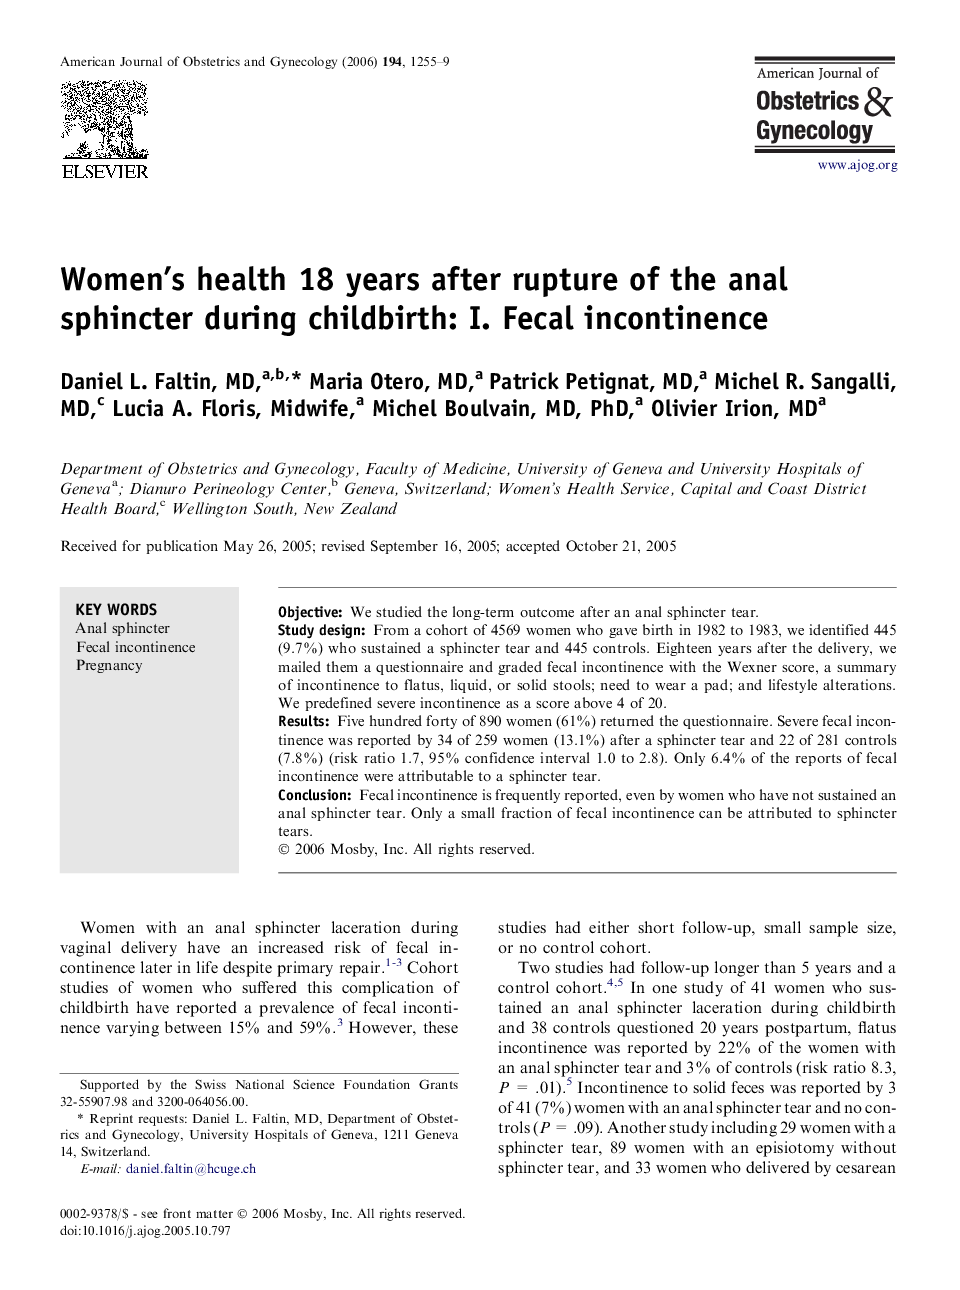 Women's health 18 years after rupture of the anal sphincter during childbirth: I. Fecal incontinence 